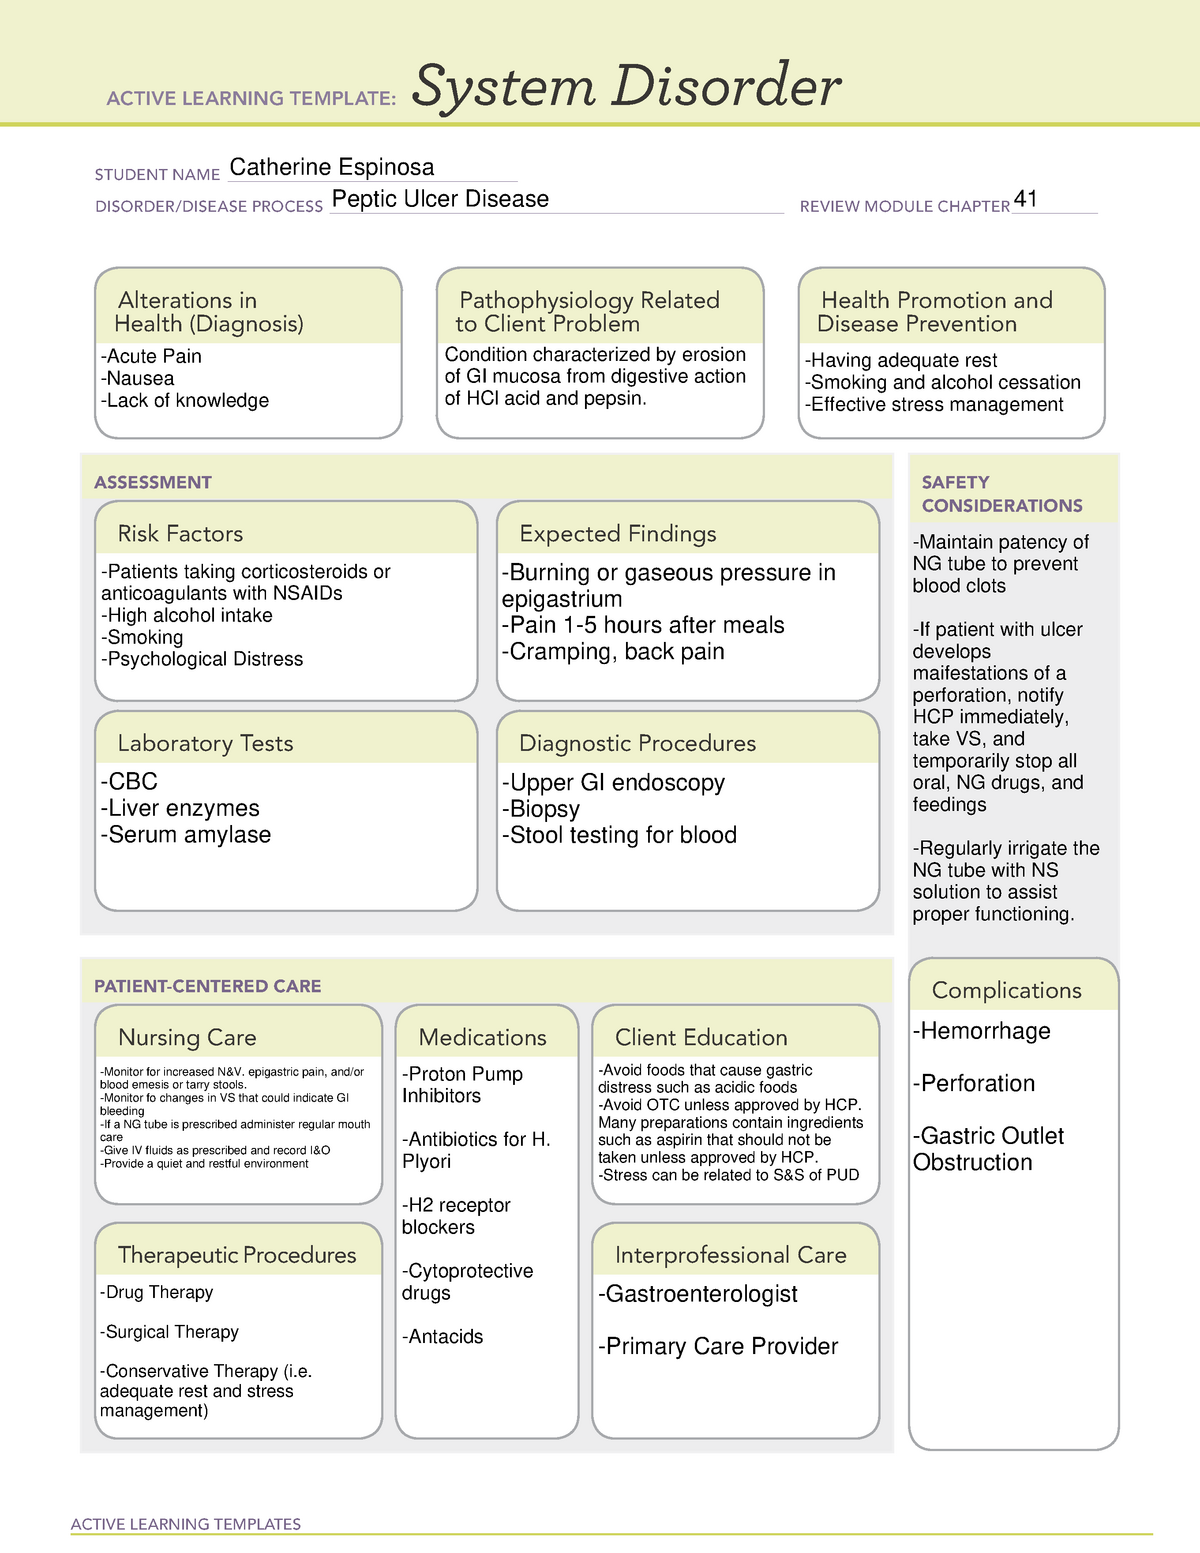 Peptic Ulcer Disease System Disorder ACTIVE LEARNING TEMPLATES System